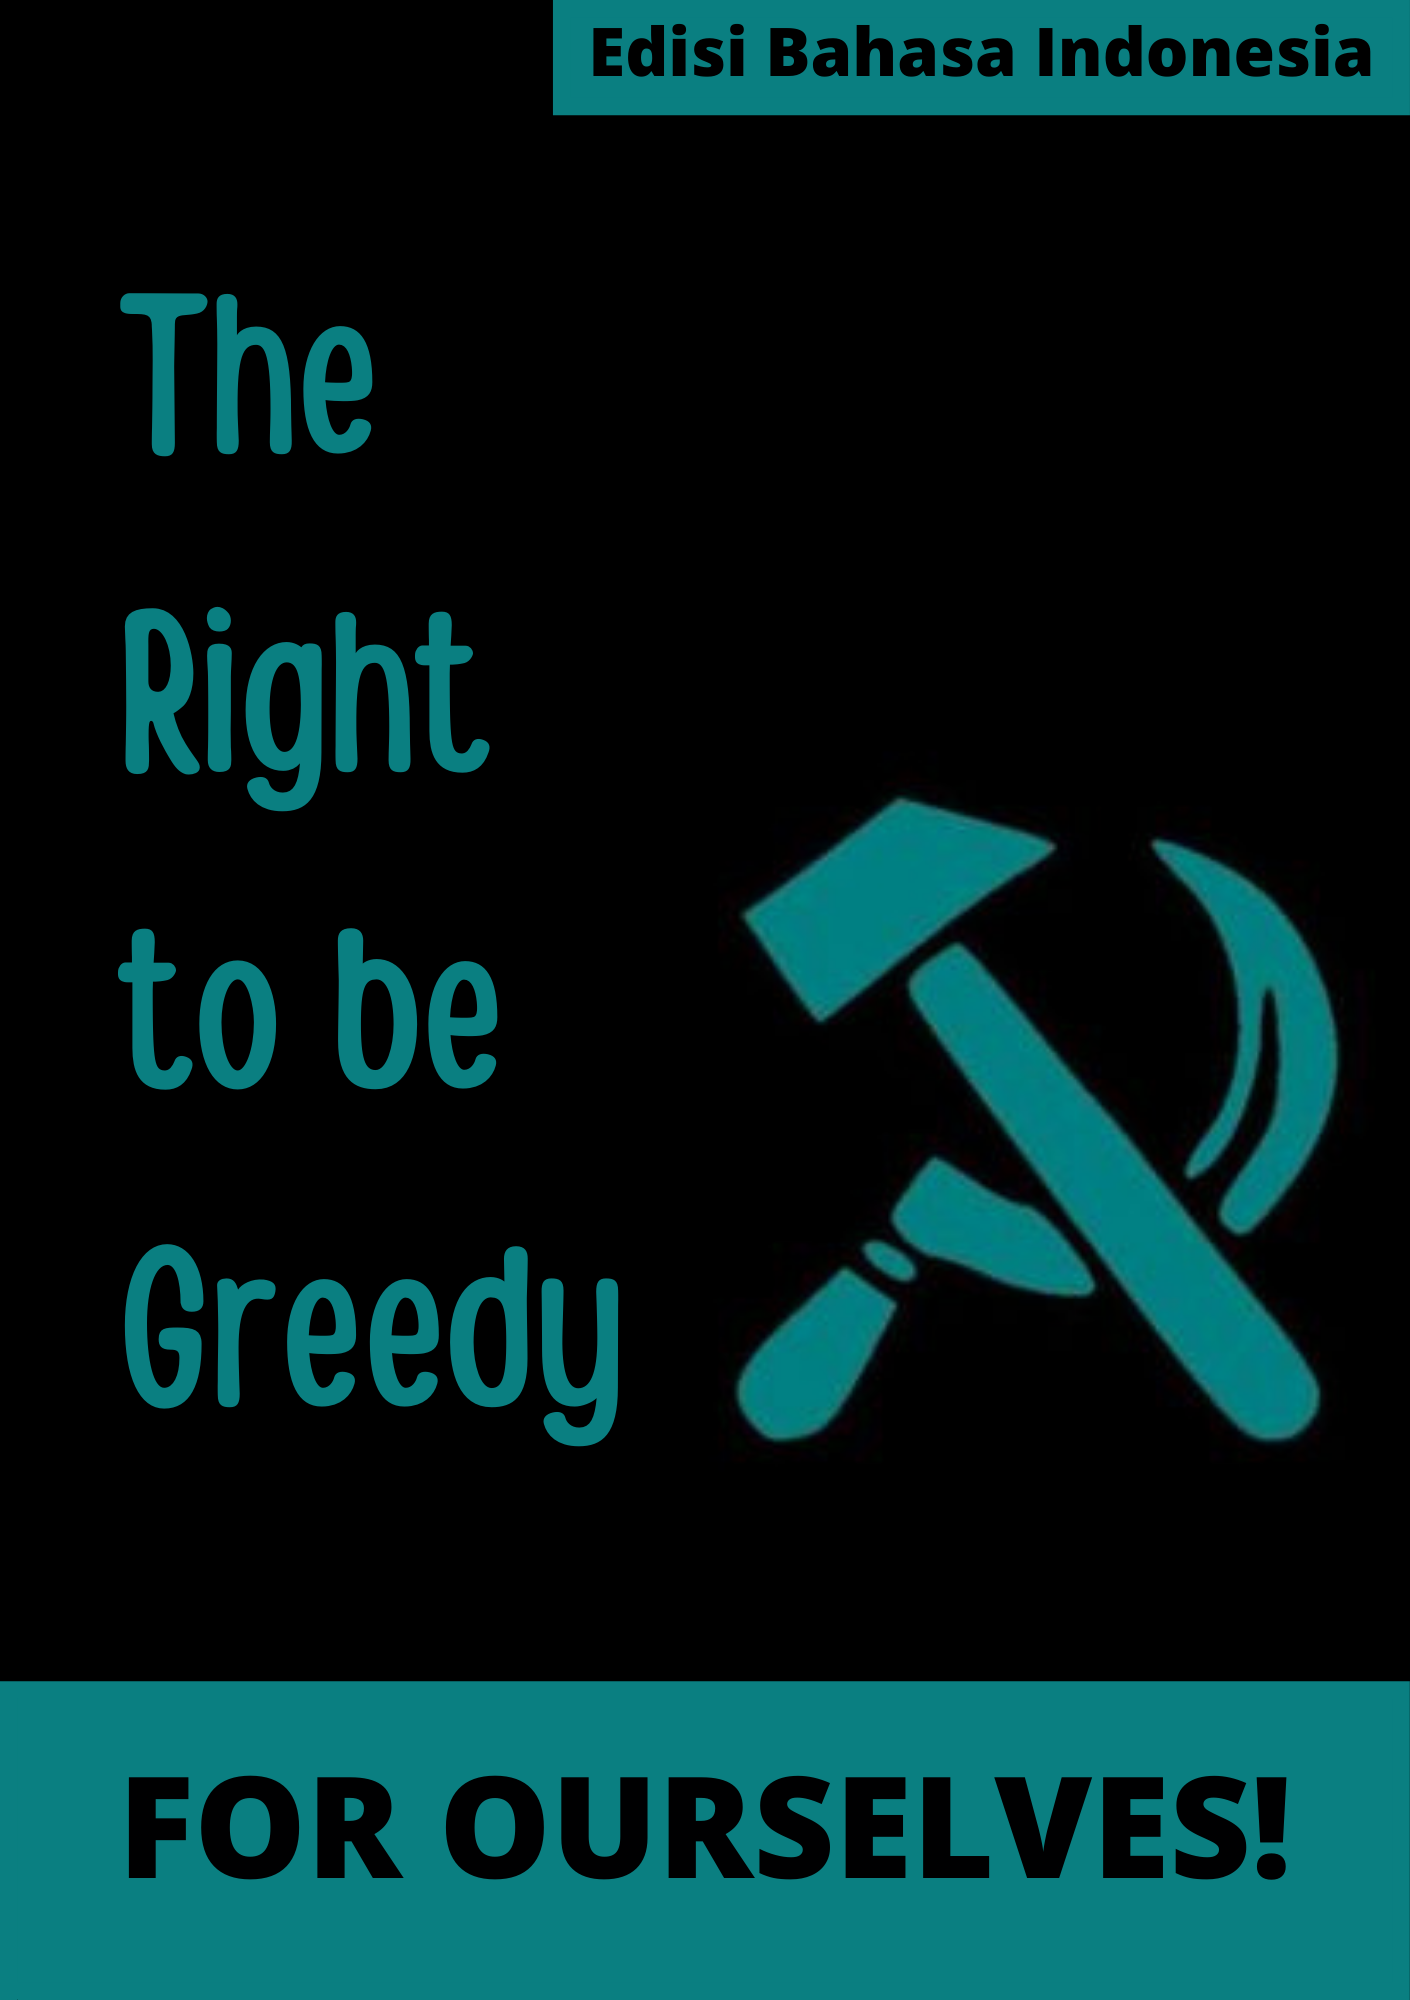 f-o-for-ourselves-the-right-to-be-greedy-id-rev-1.png